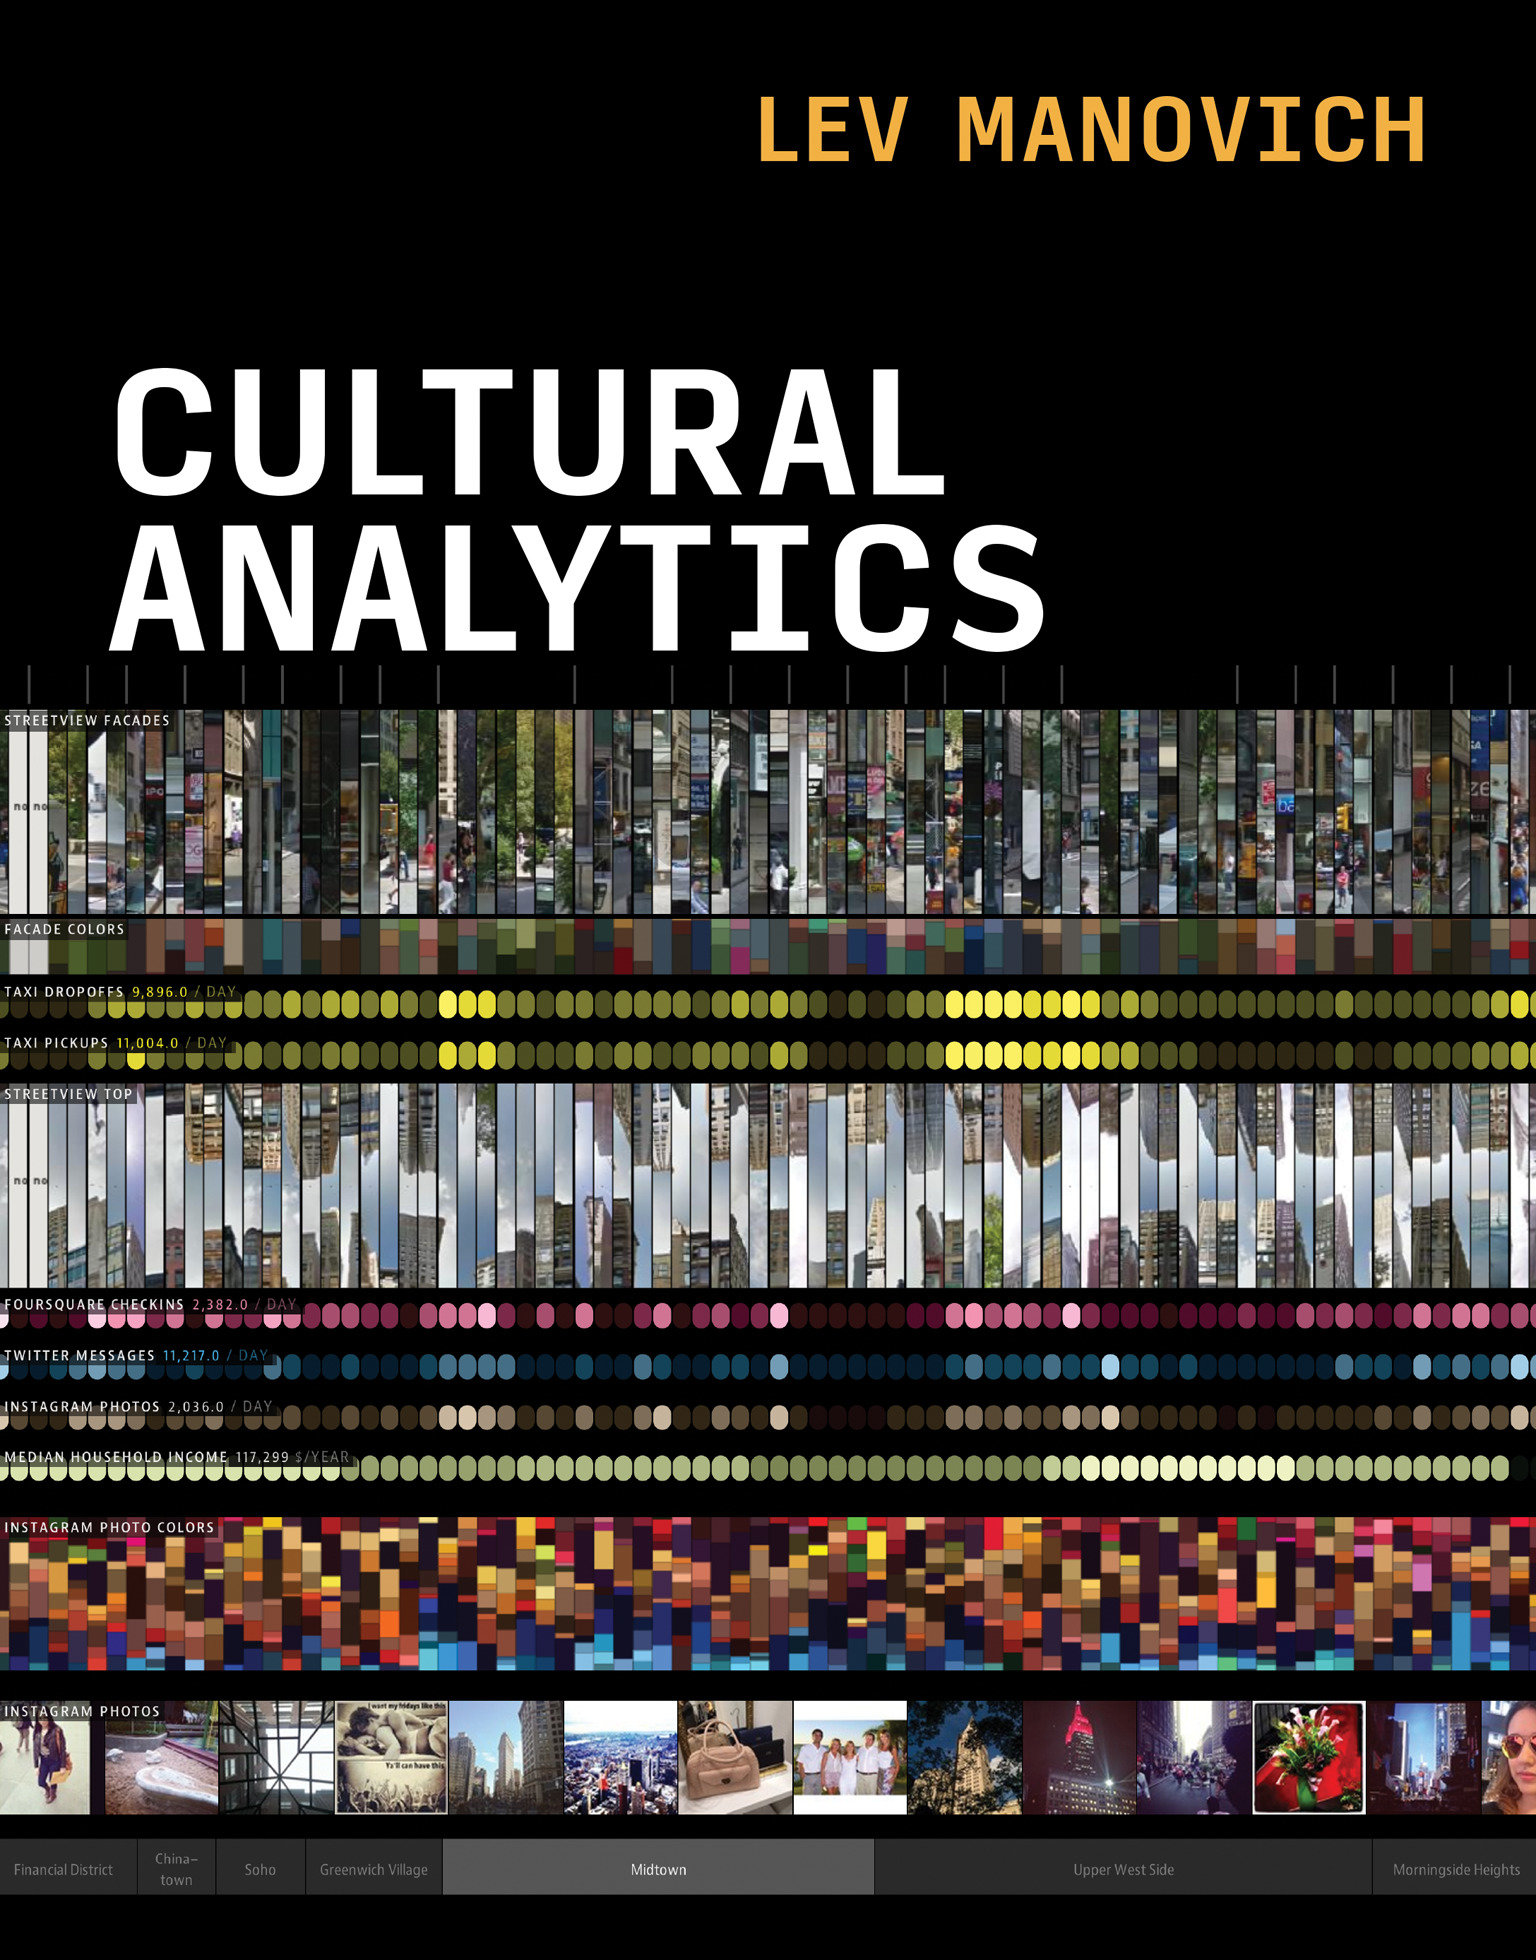 Cultural Analytics (Hardcover Book)